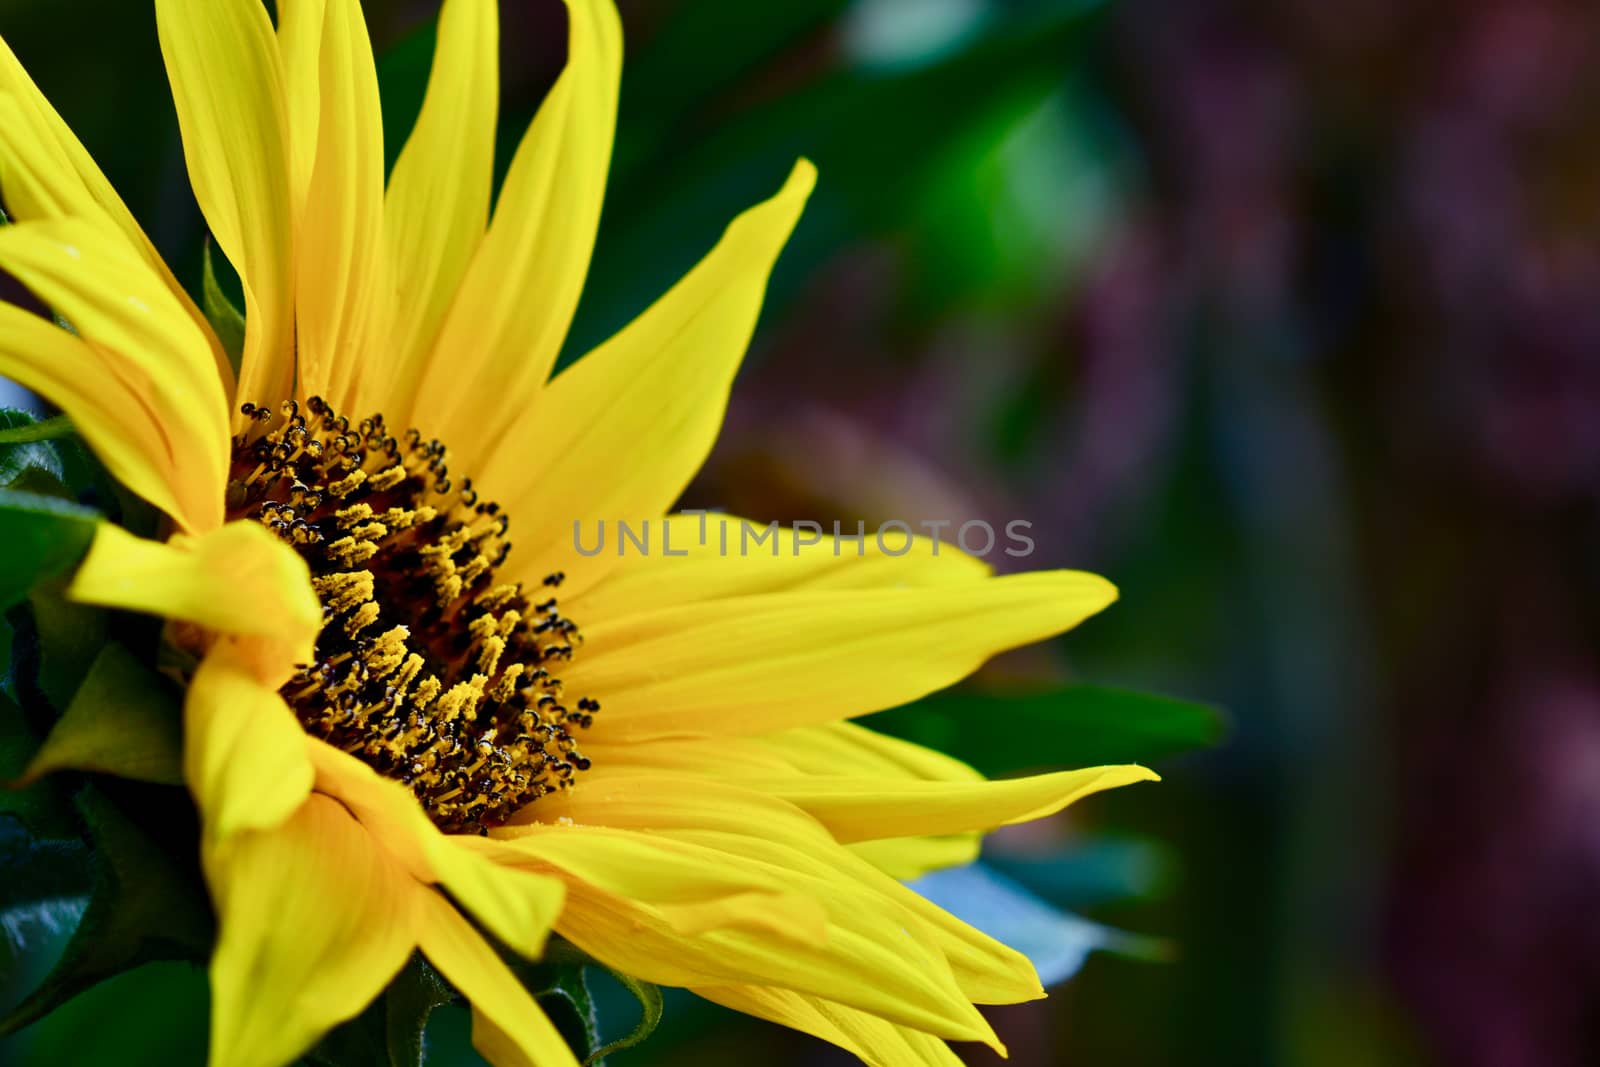 A lovely bright yellow flower; cheerful and nice sunflower